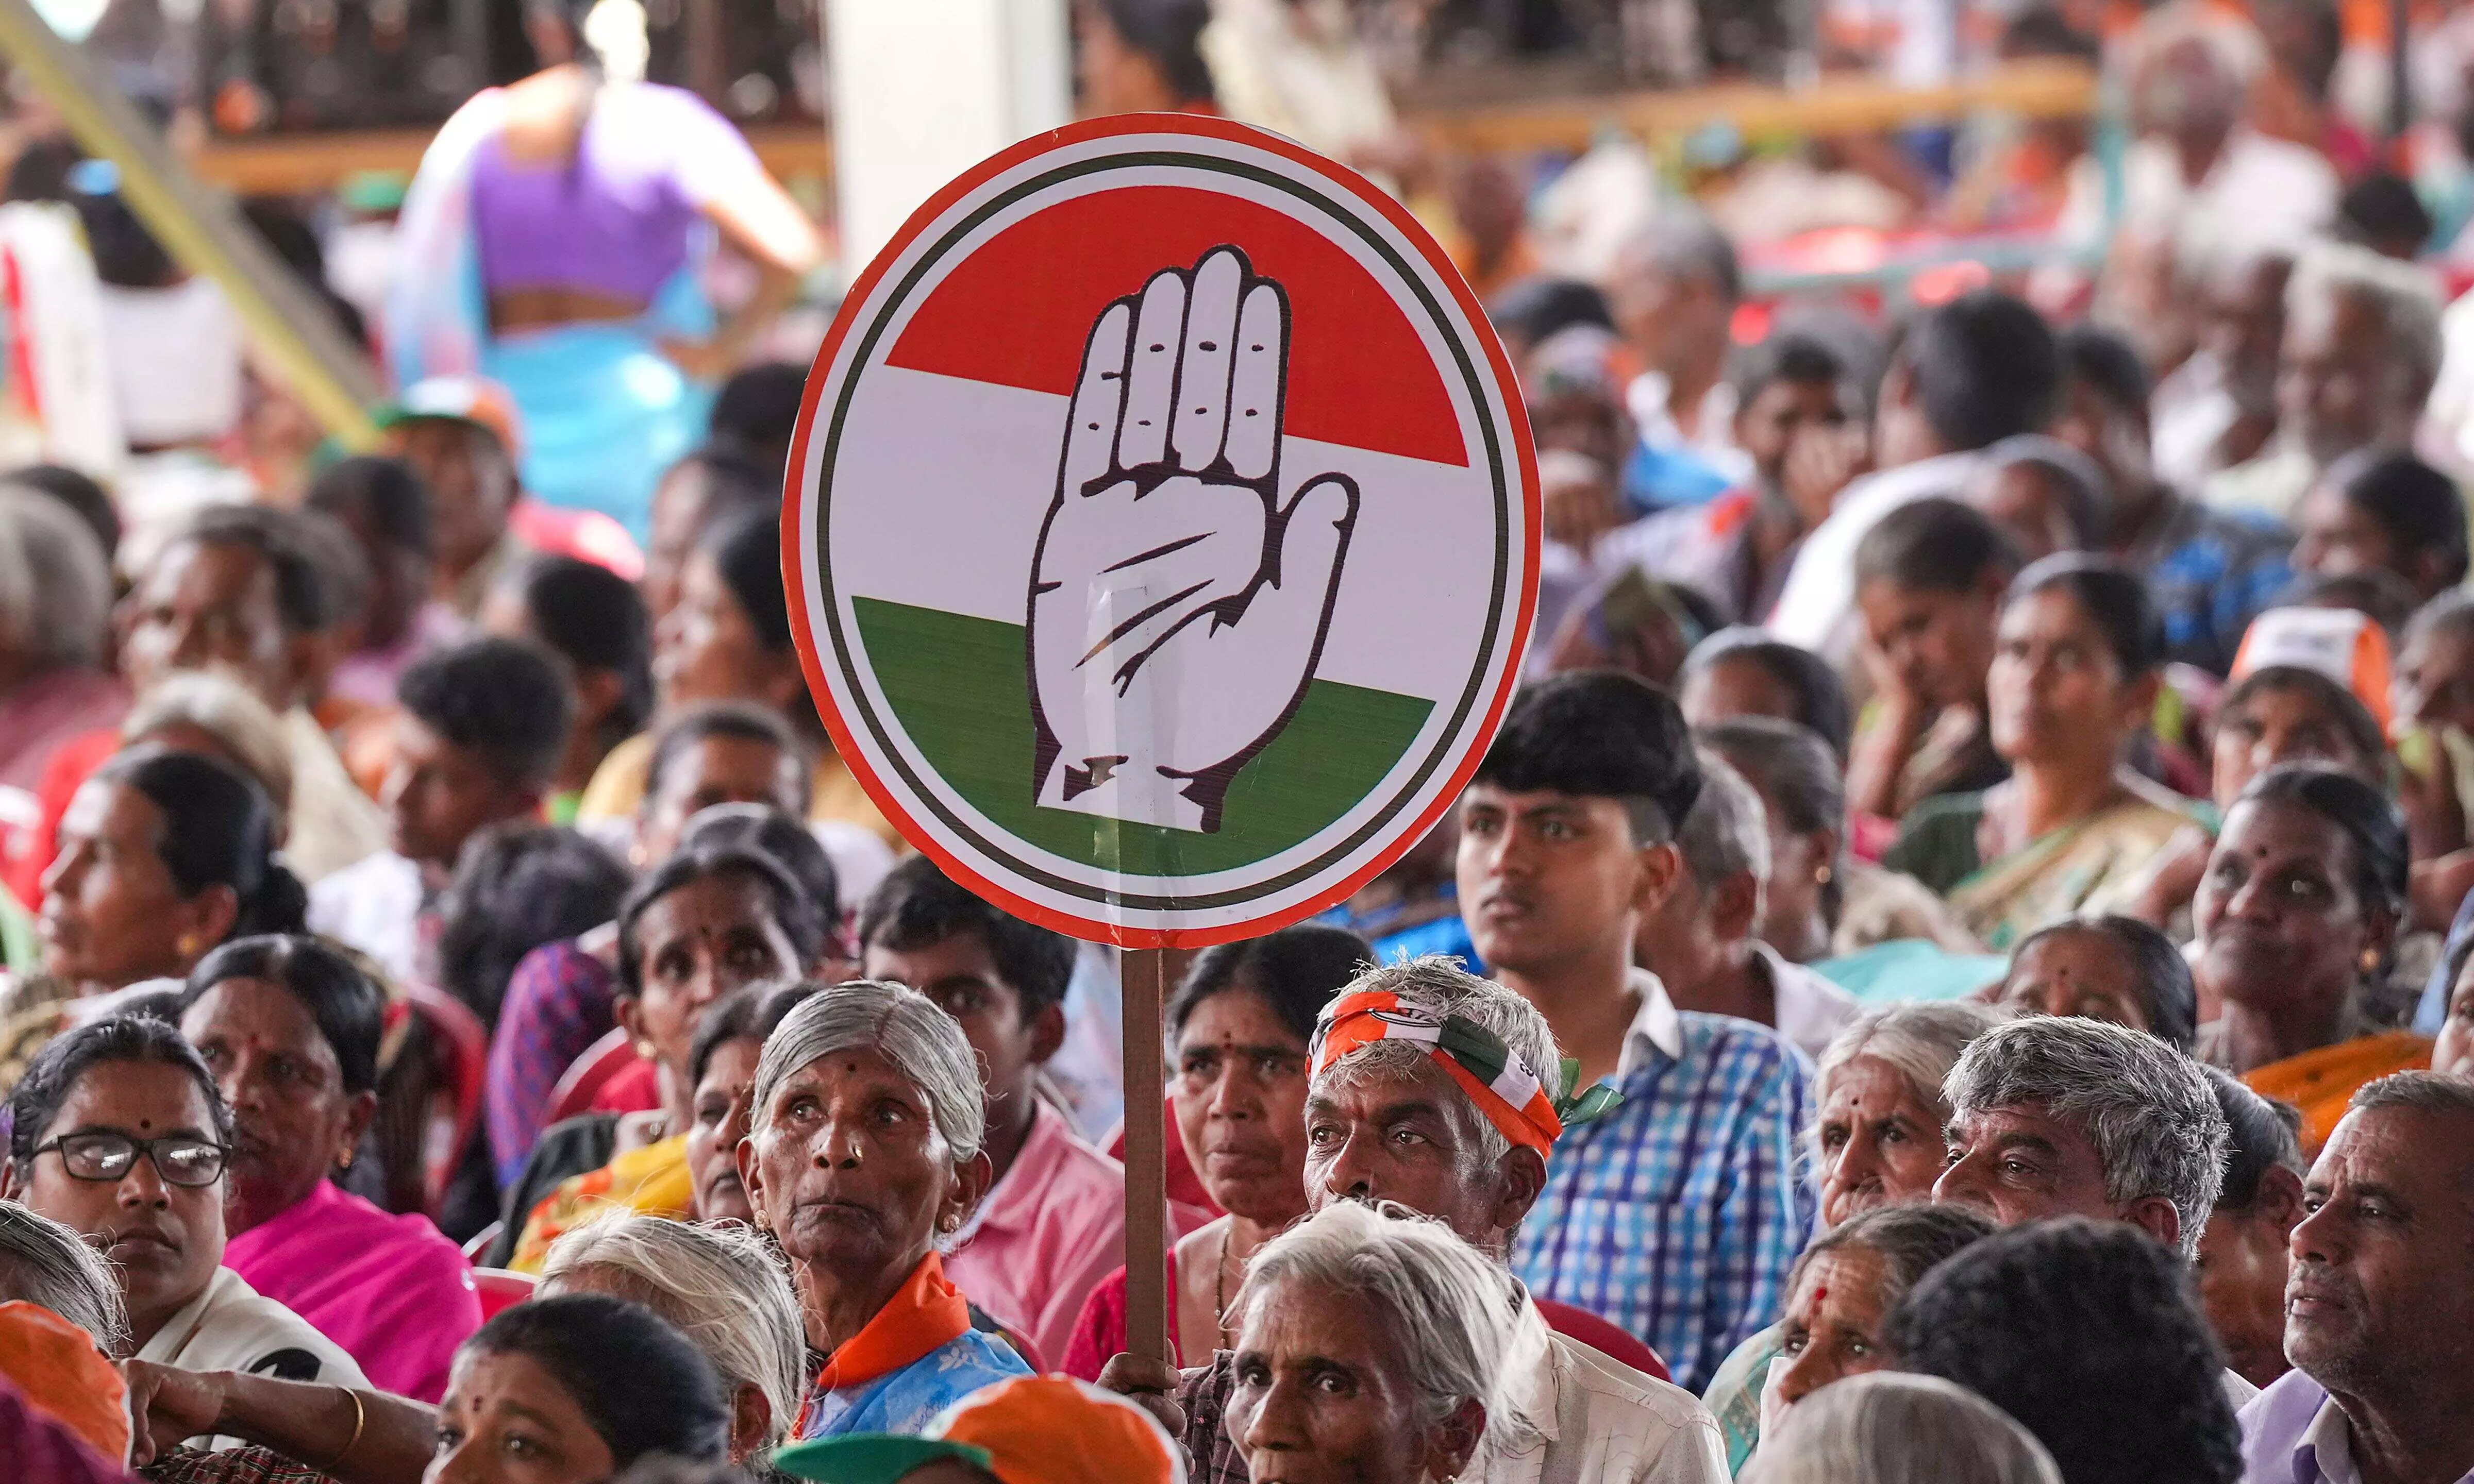 Cong accuses CPI(M) of bringing down polling percentage